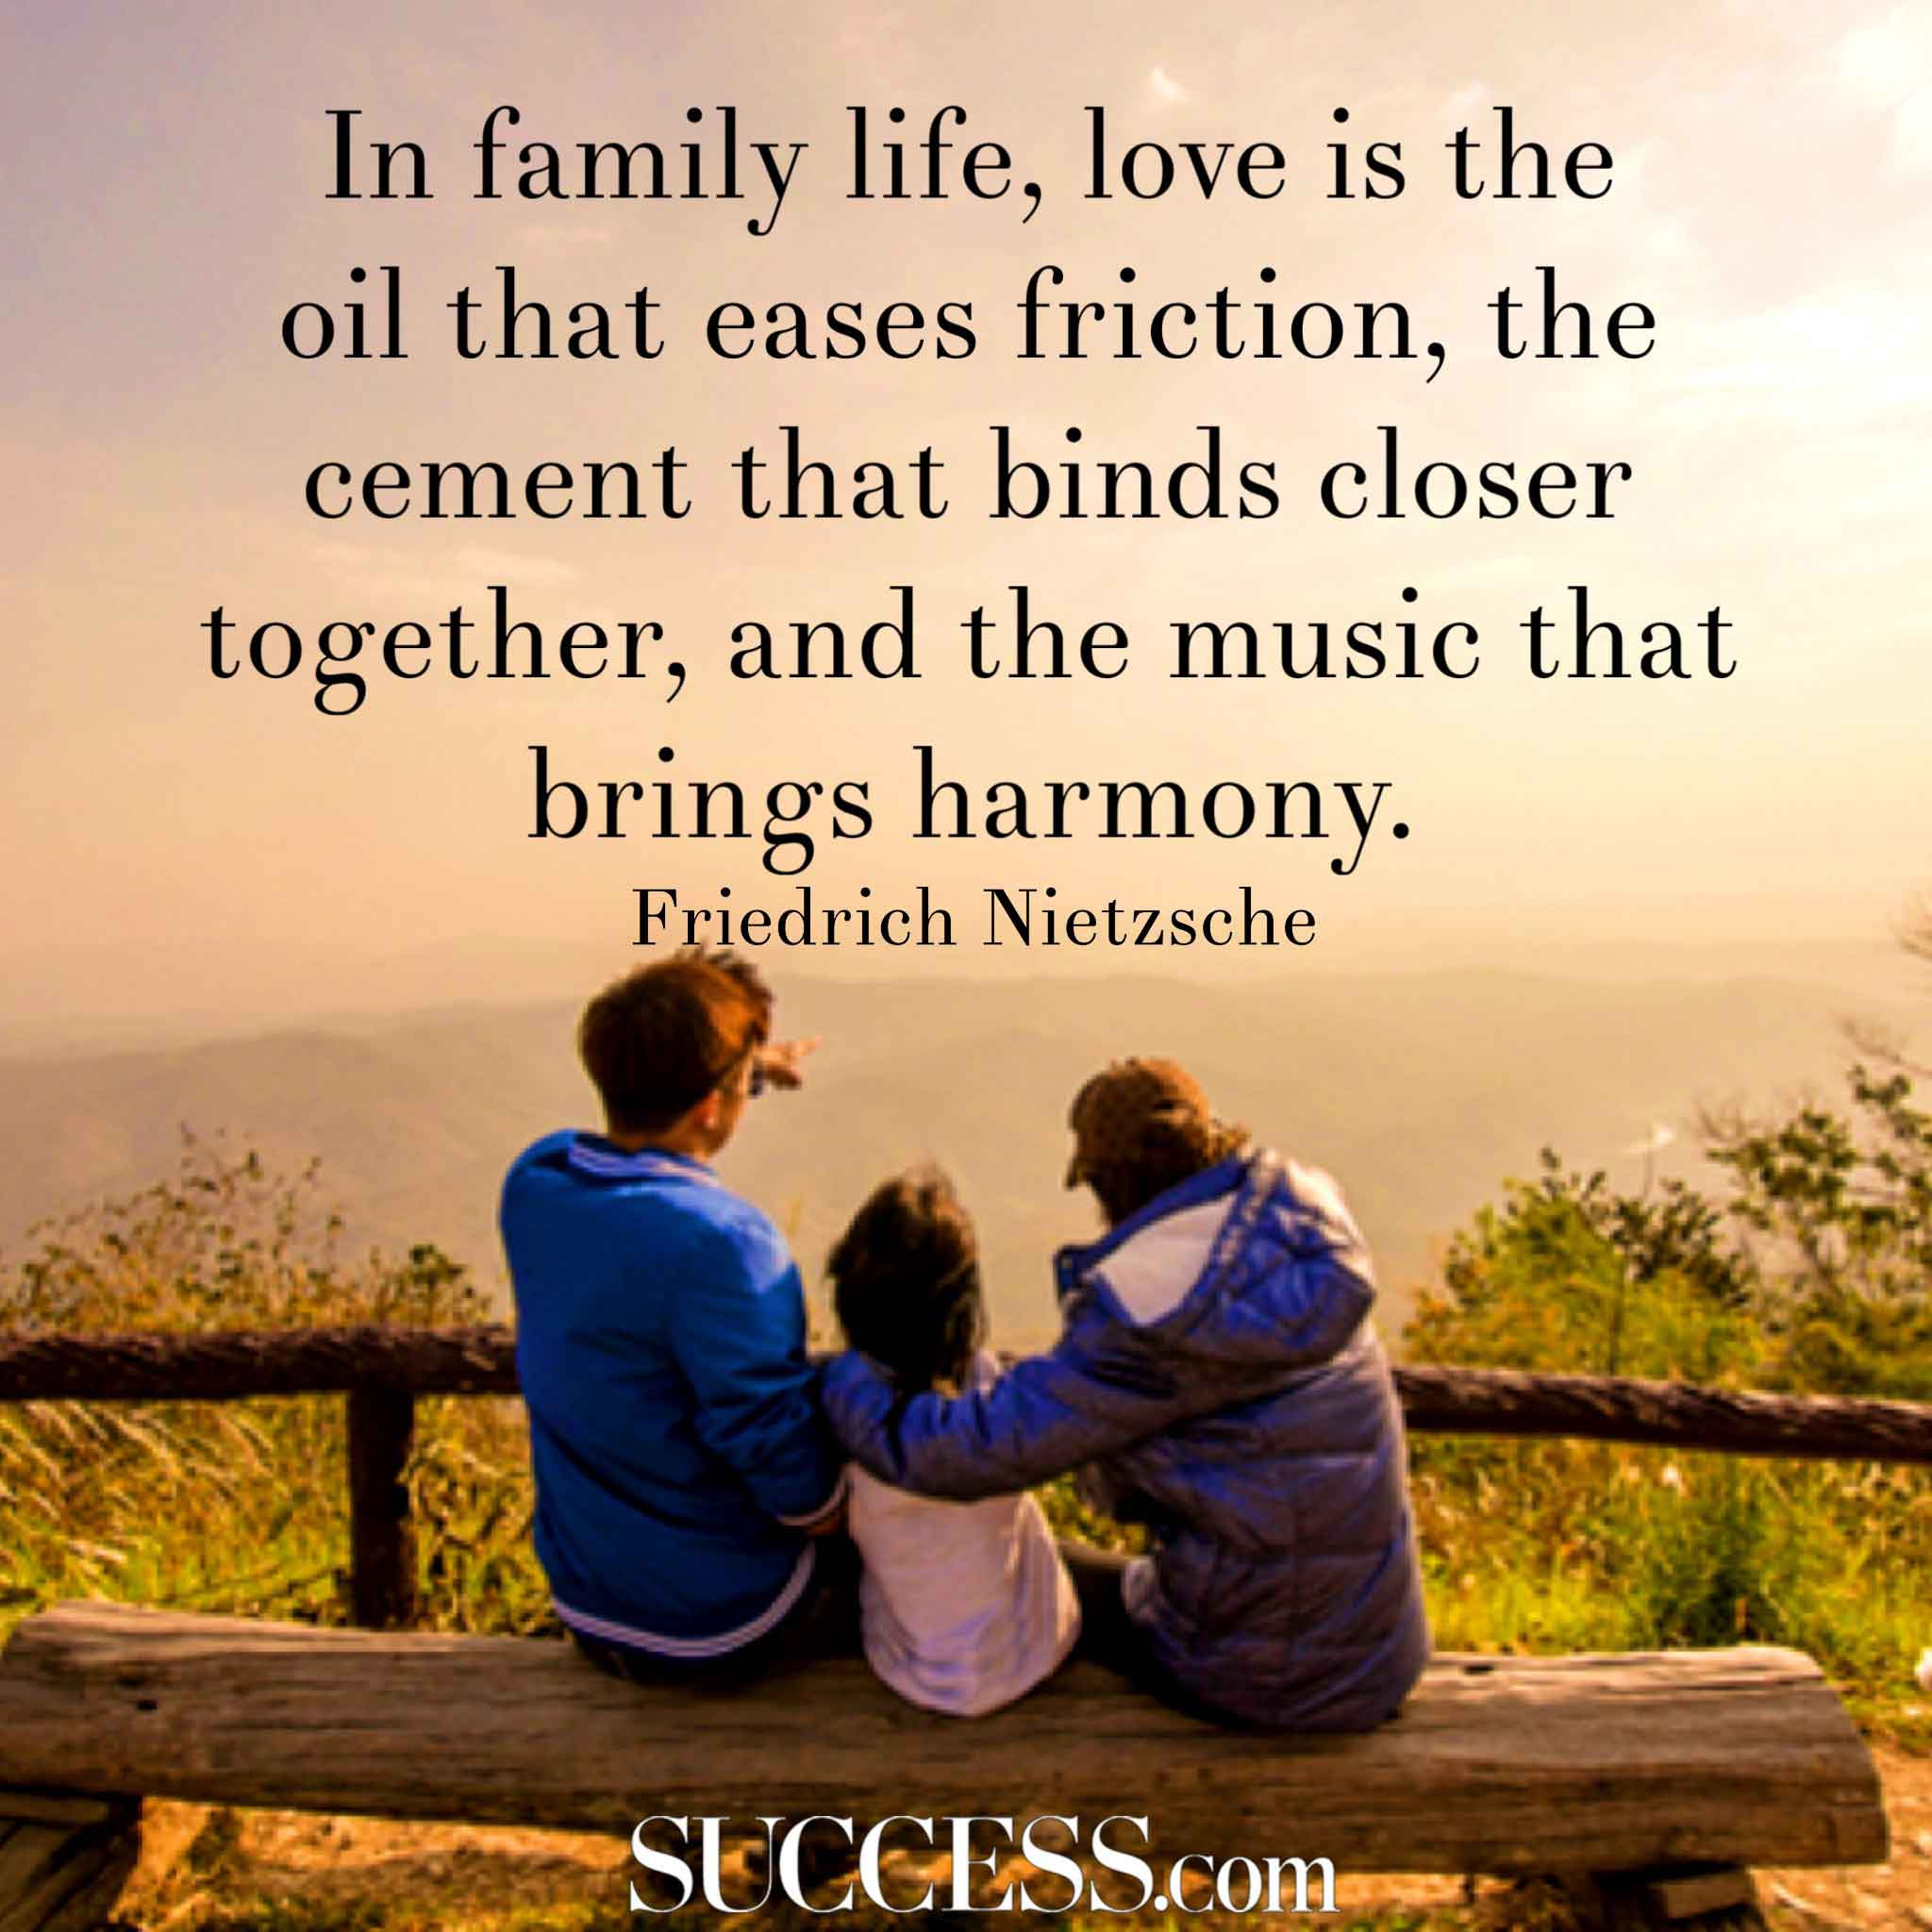 Love Family Quotes
 55 Most Beautiful Family Quotes And Sayings